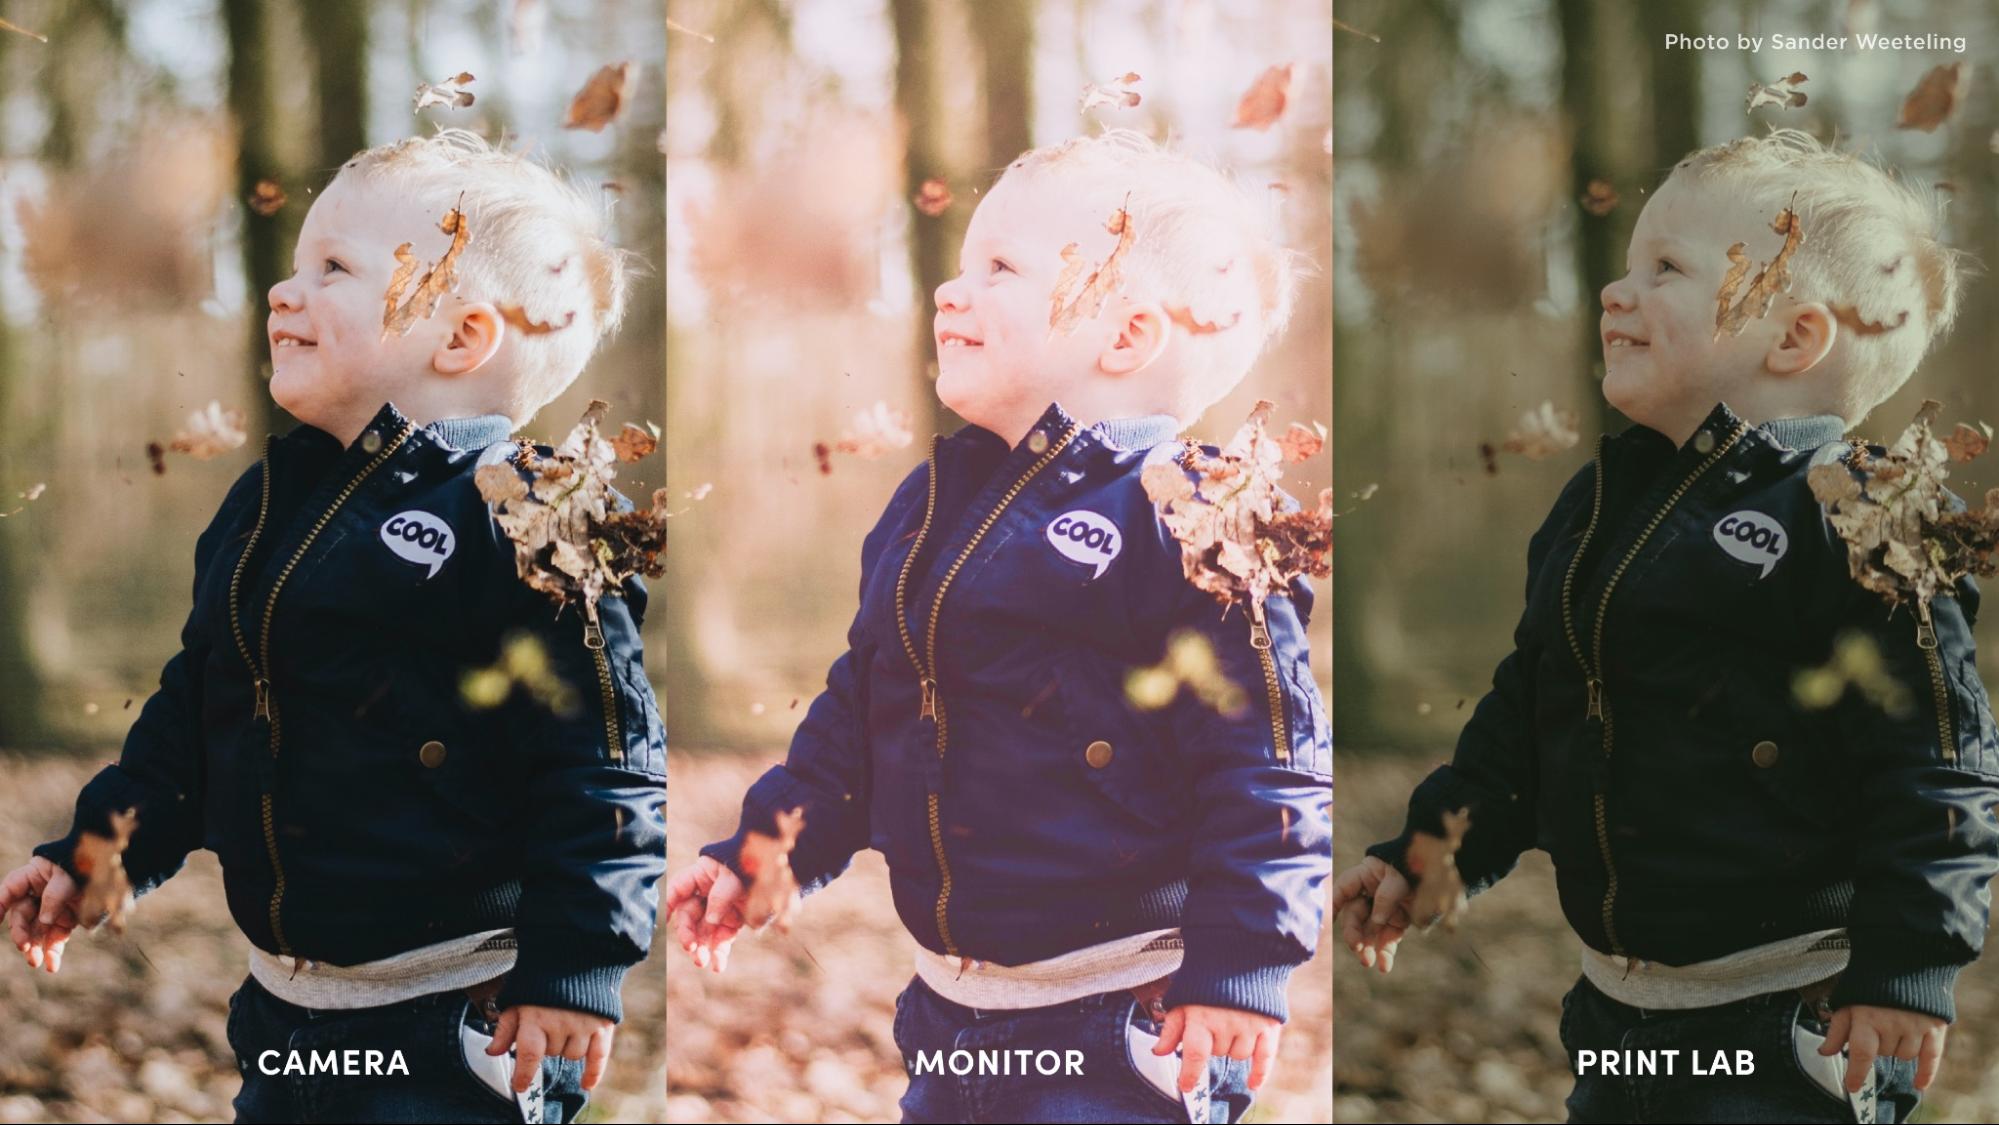 A triptych showing the differences in how an image appears between camera, monitor, and print.